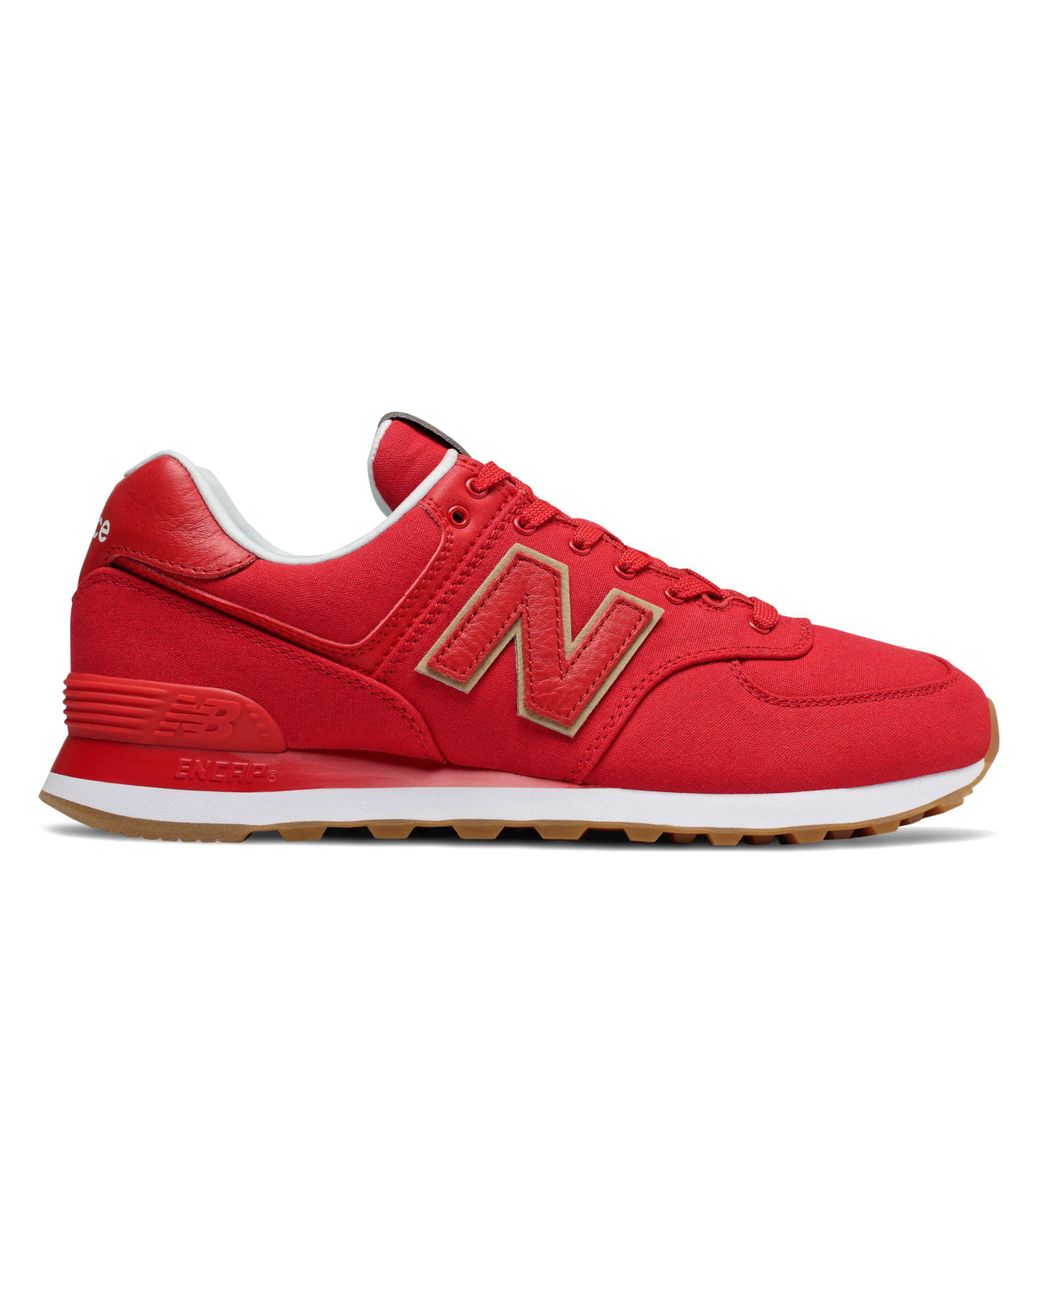 Lyst - New Balance 574 in Red for Men